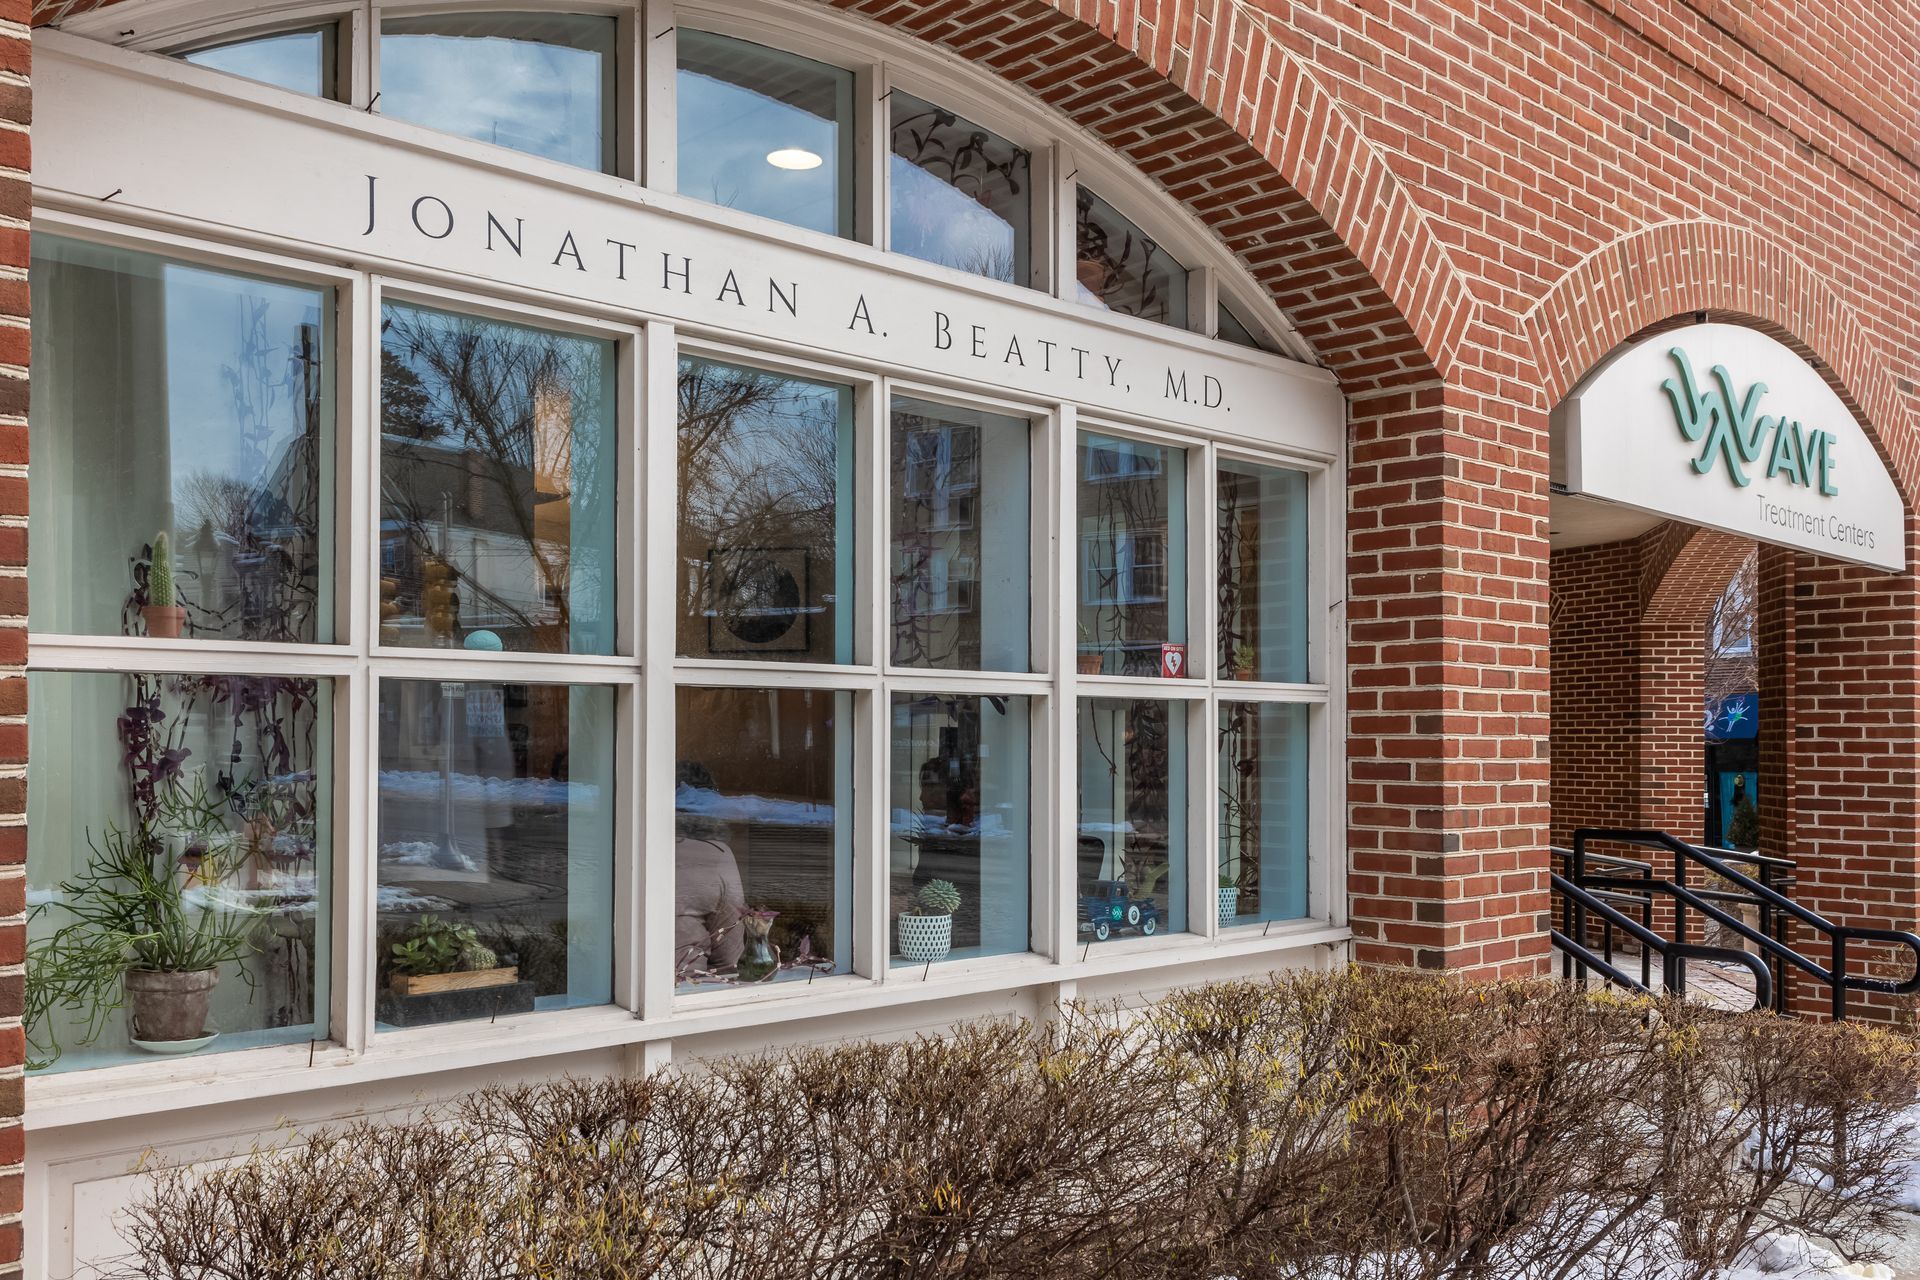 A brick building with a lot of windows and a sign that says ' jonathan x smith ' on it.